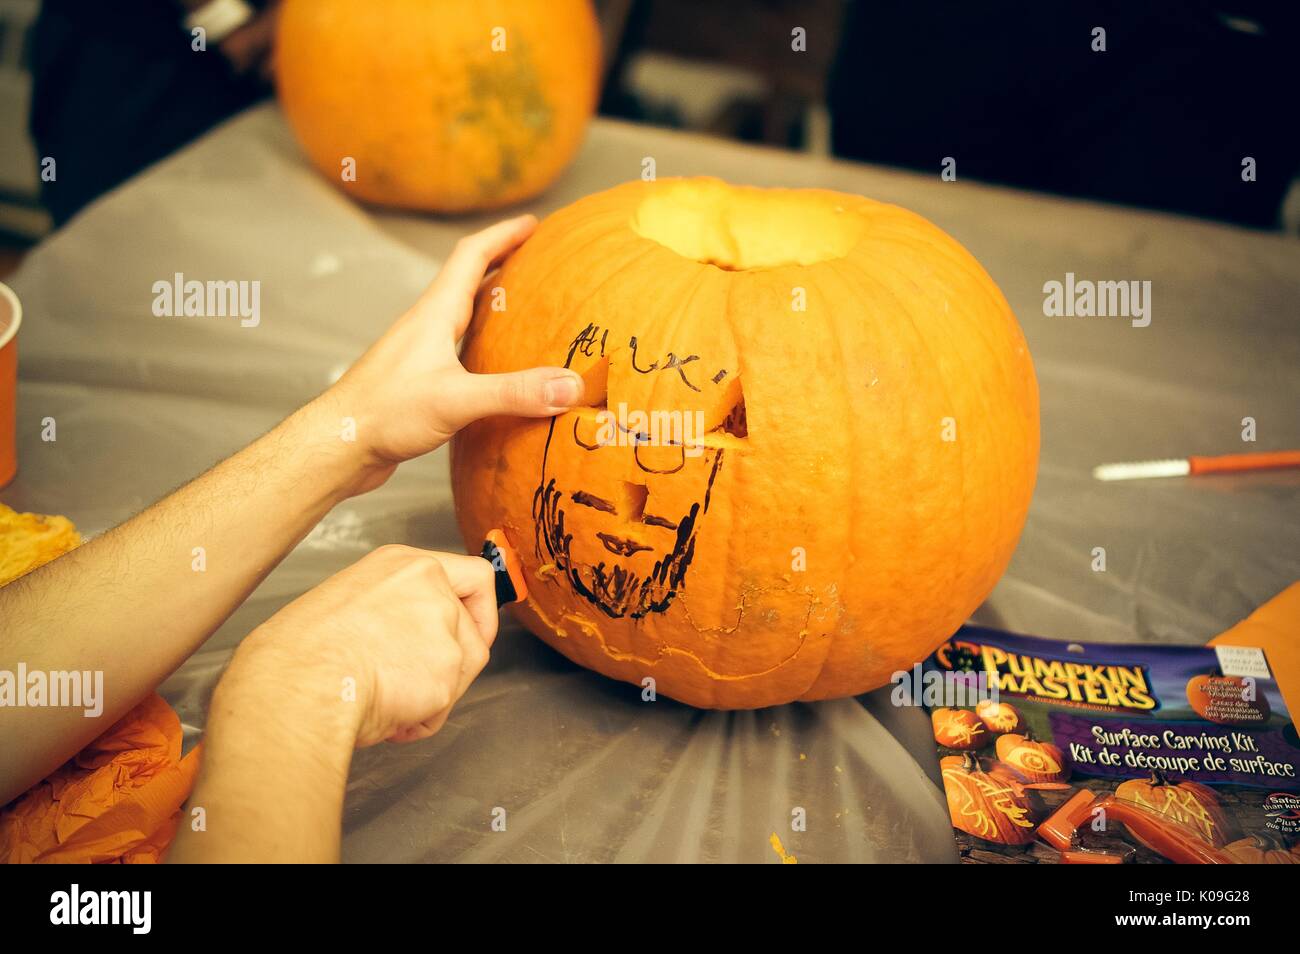 View of the front of a pumpkin that has had its stem and some of its side carved out, one hand is holding the pumpkin while the other works to carve the pumpkin, there is a drawing of a face on the pumpkin with Sharpie, 2015. Stock Photo